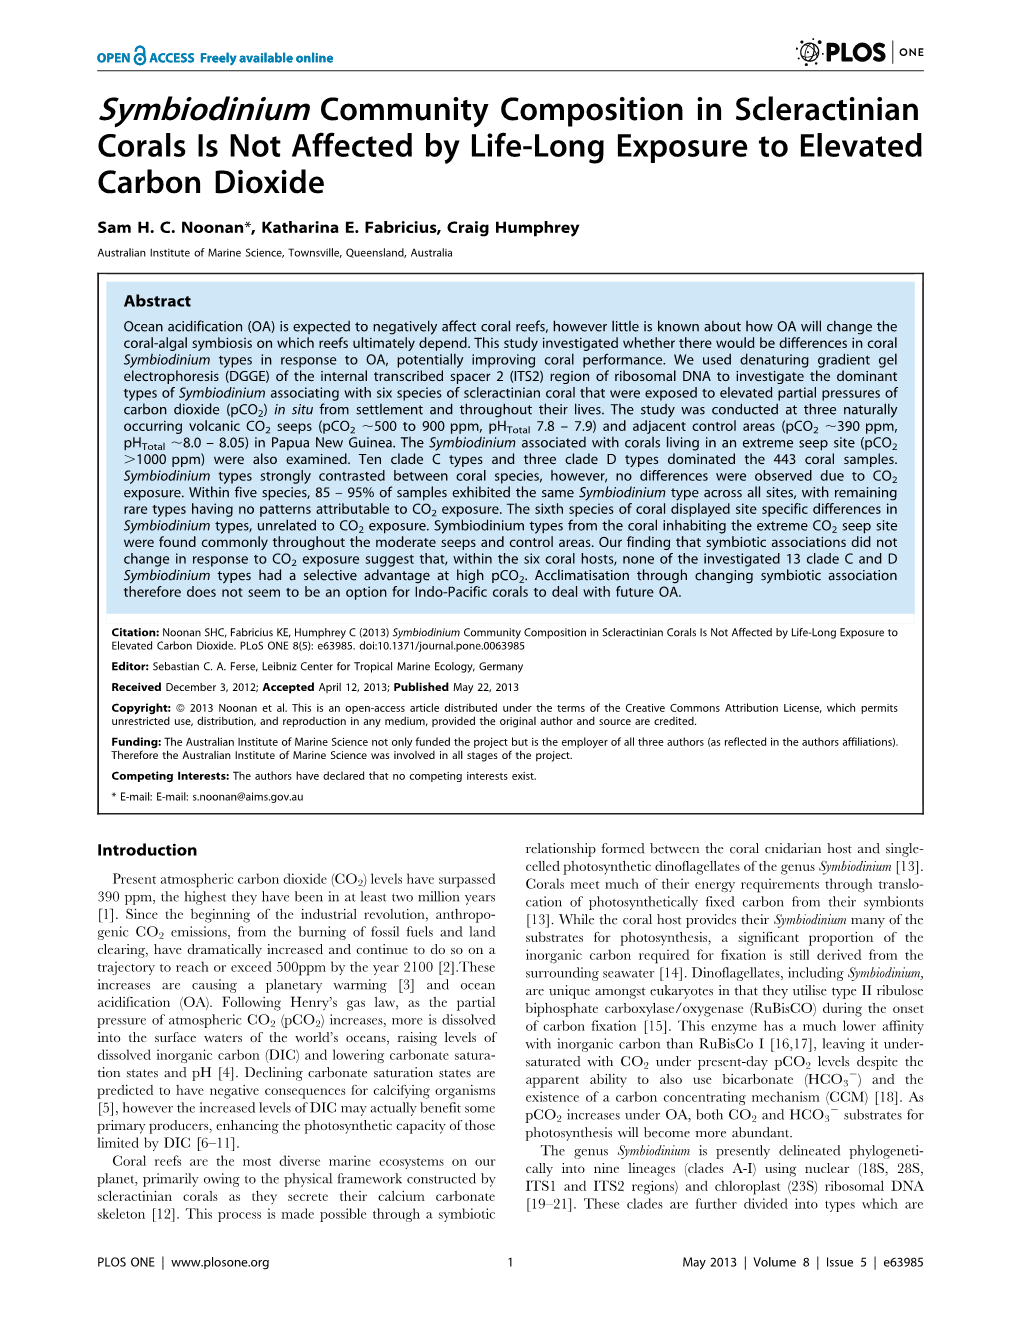 Symbiodinium Community Composition in Scleractinian Corals Is Not Affected by Life-Long Exposure to Elevated Carbon Dioxide